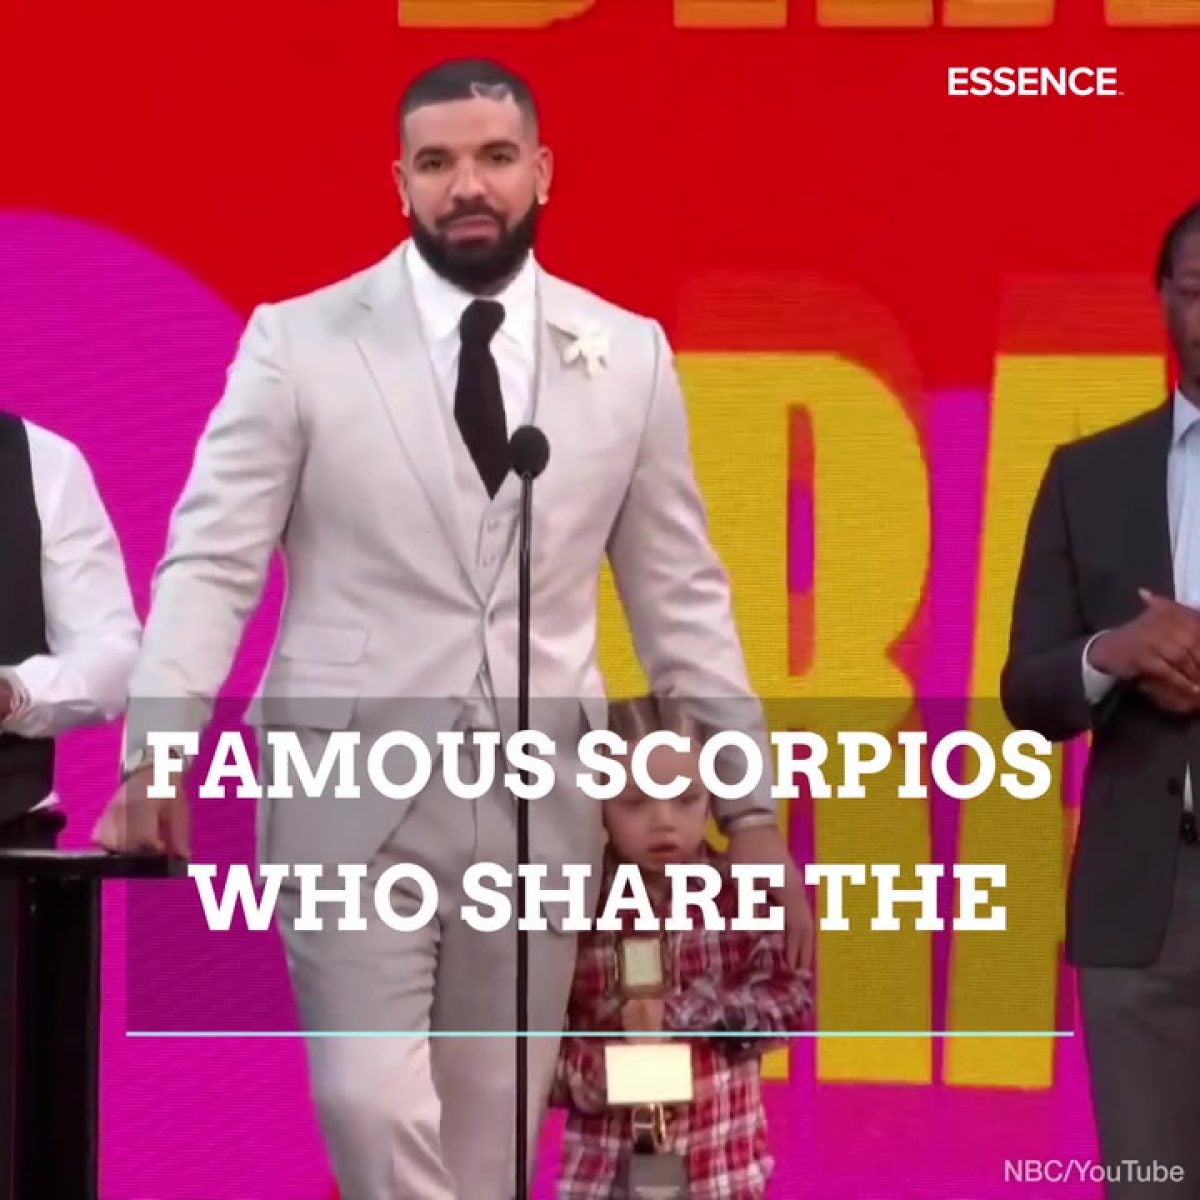 In My Feed | Famous Scorpios Who Share the Star Sign